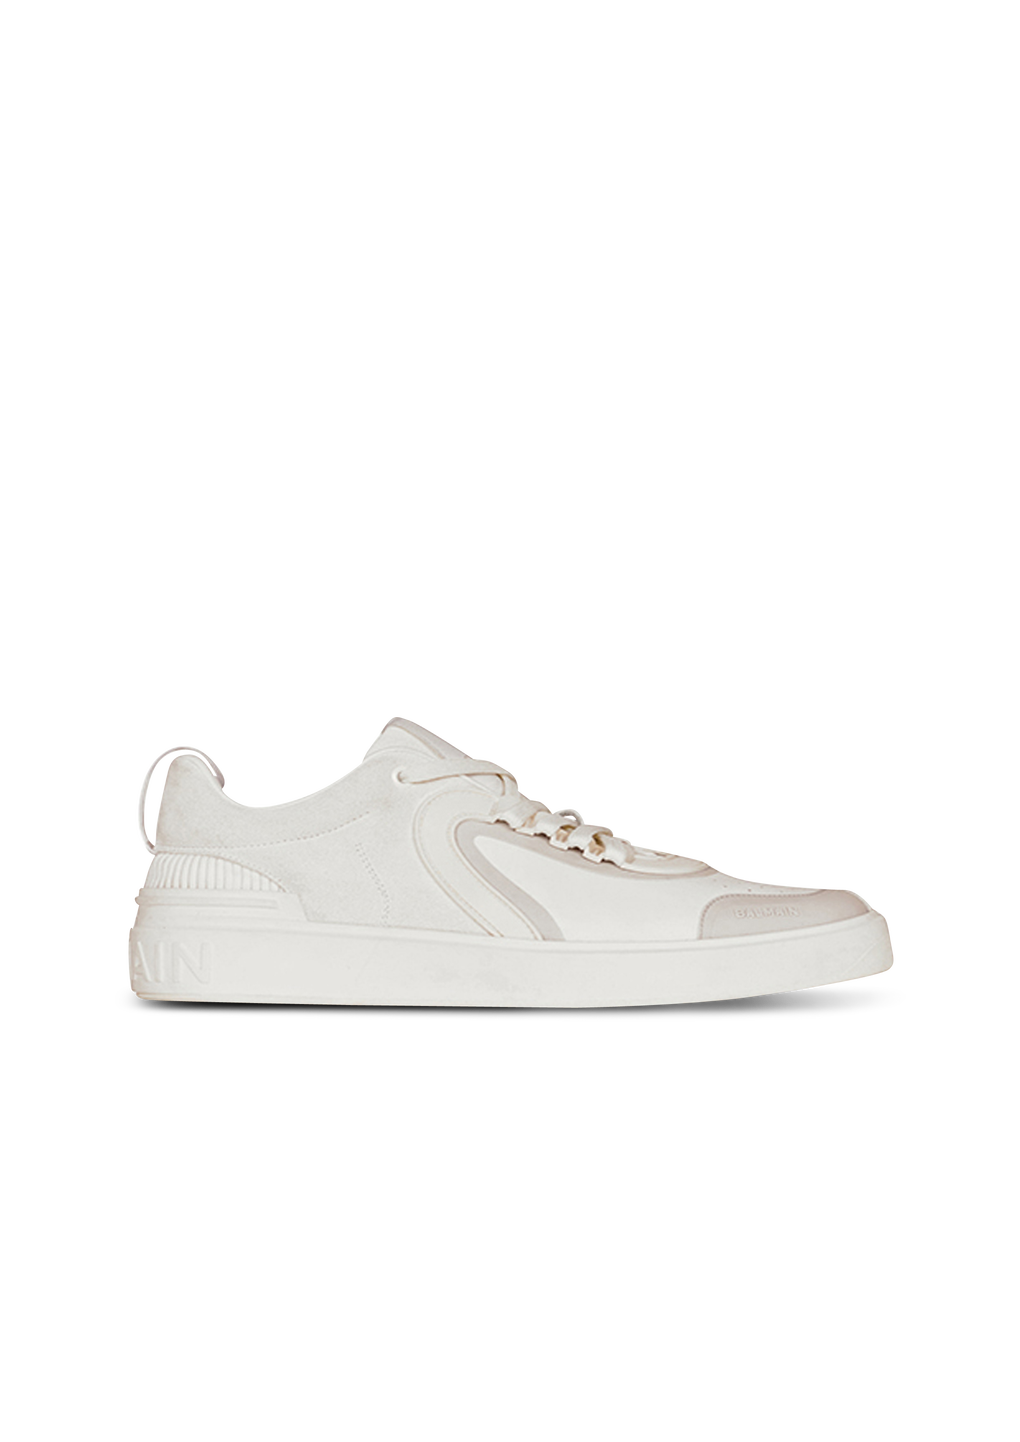 Leather and suede B-Skate sneakers, white, hi-res